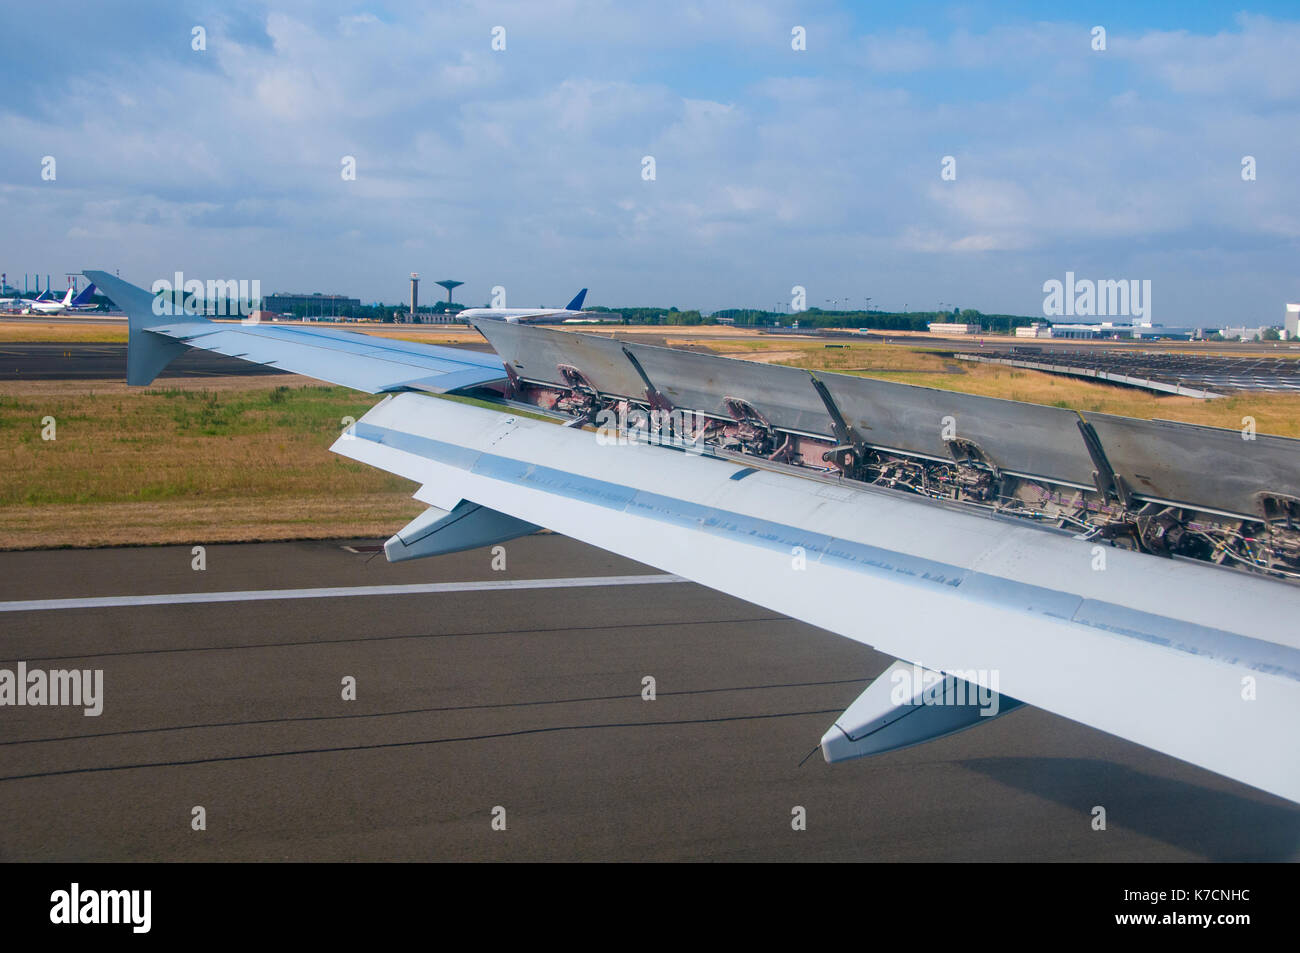 Plane is landing on runway in airport on along landing strip. Flaps are released on the plane wing to top it efficiently. Stock Photo